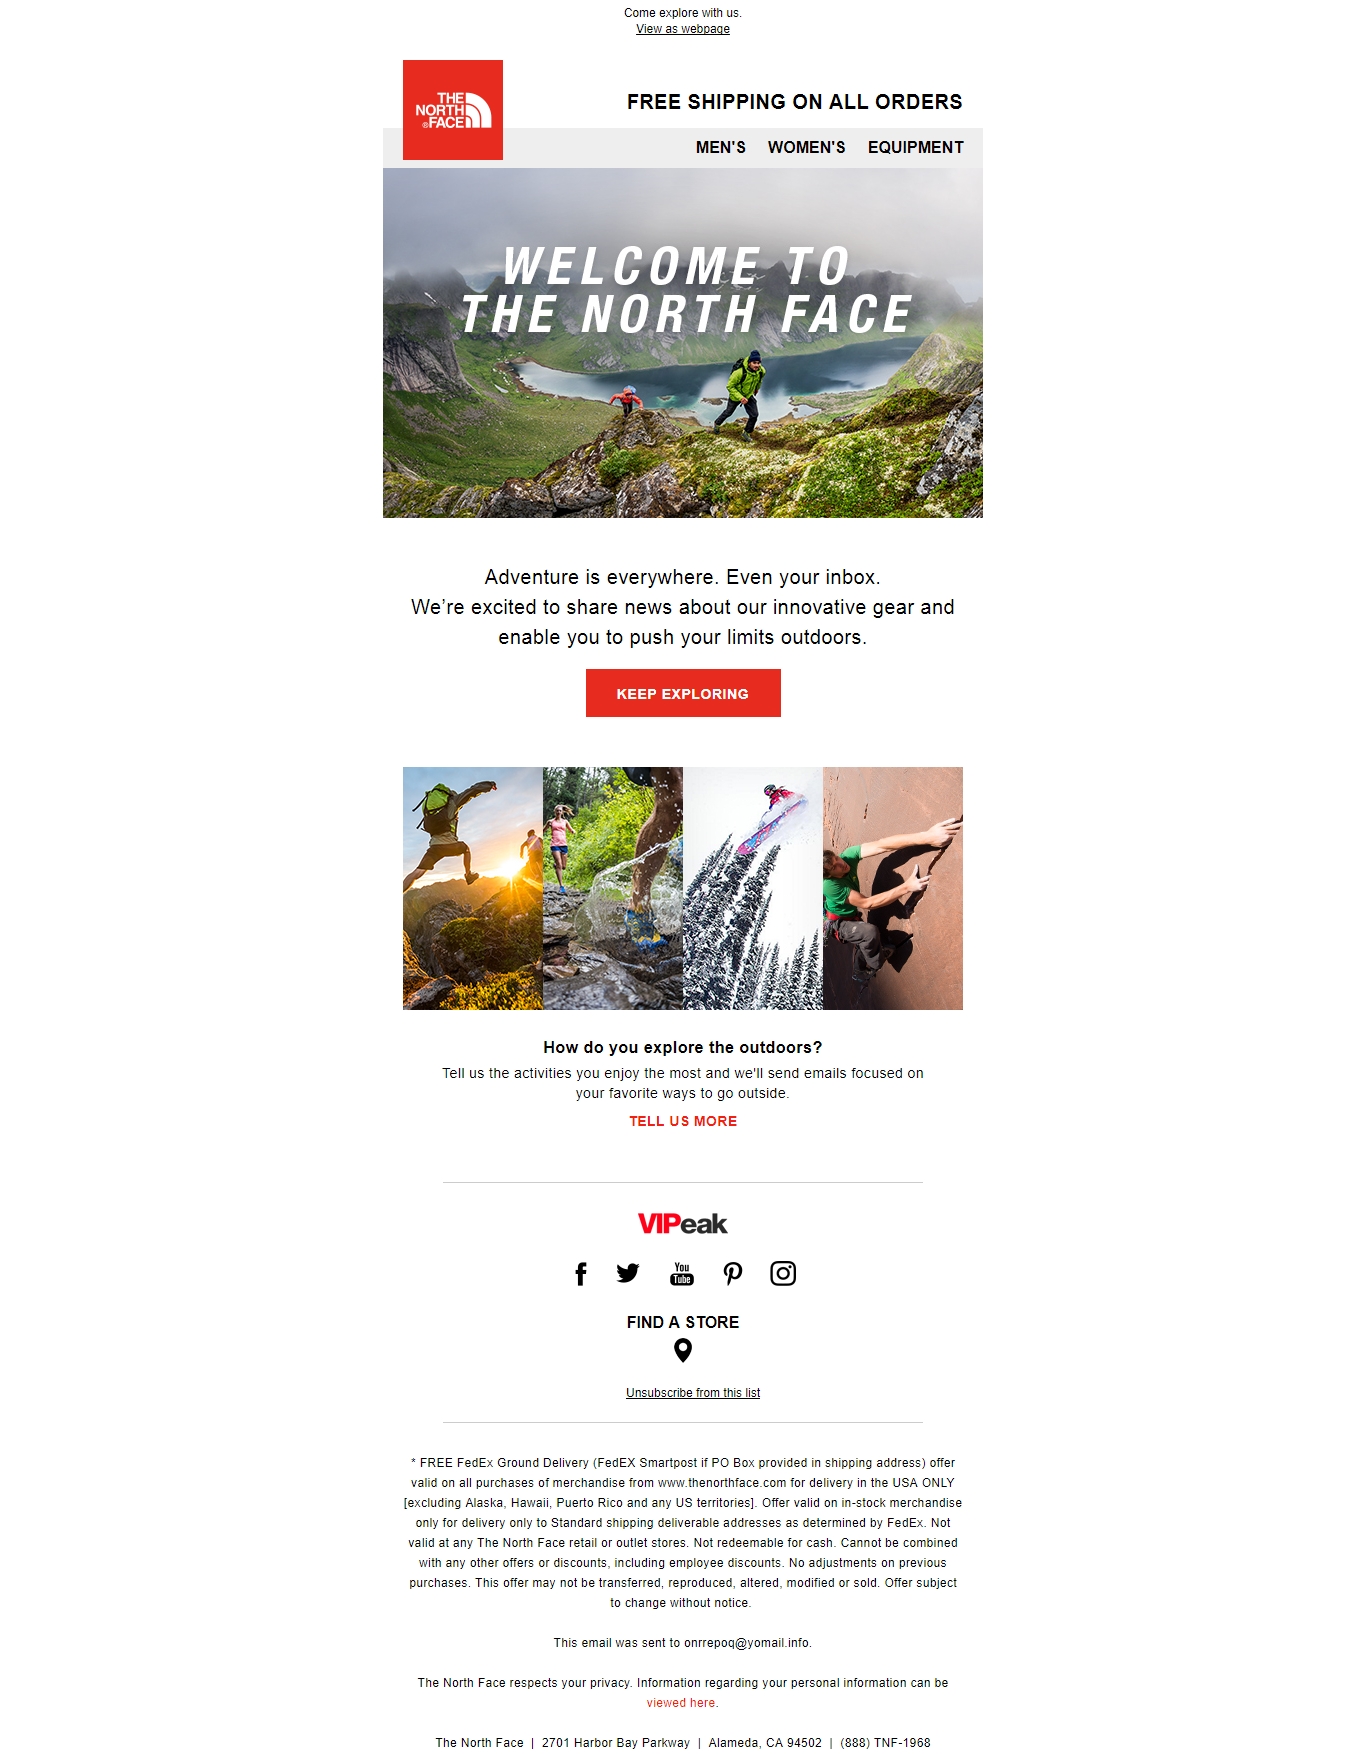 45% Off The North Face Coupon Code | The North Face 2018 ...